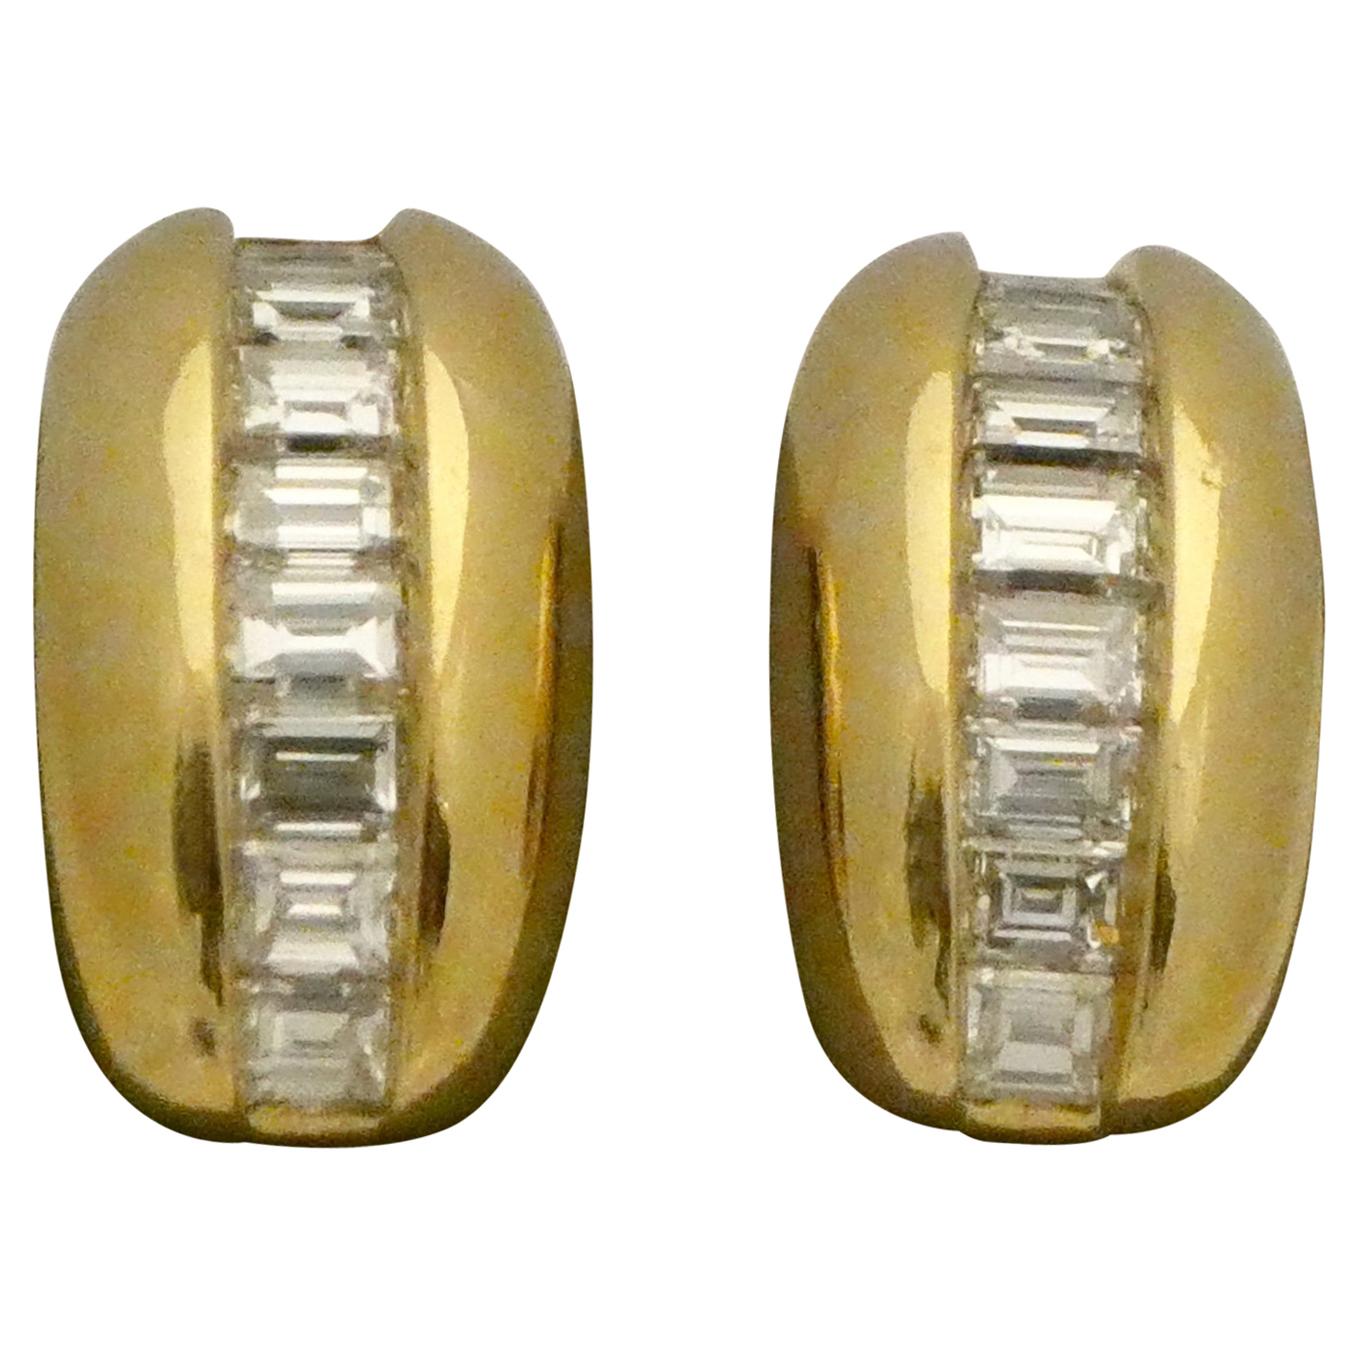 18 Karat Yellow Gold Cartier Diamond Earrings, from the "Odin" Collection